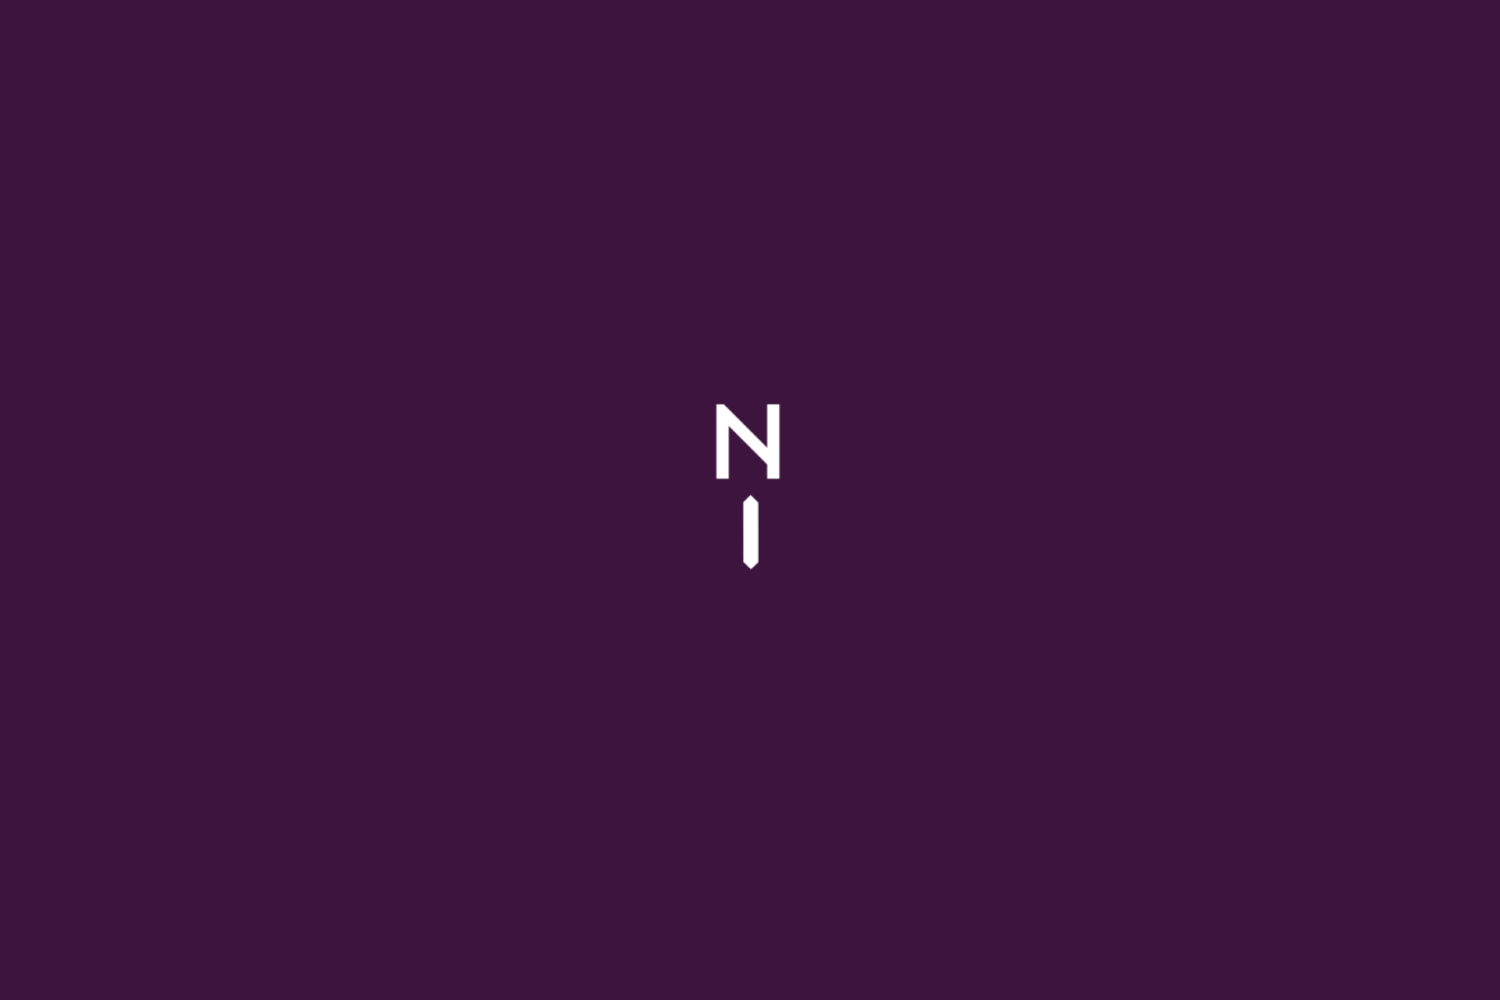 New Logo and Identity for Norwest by Re